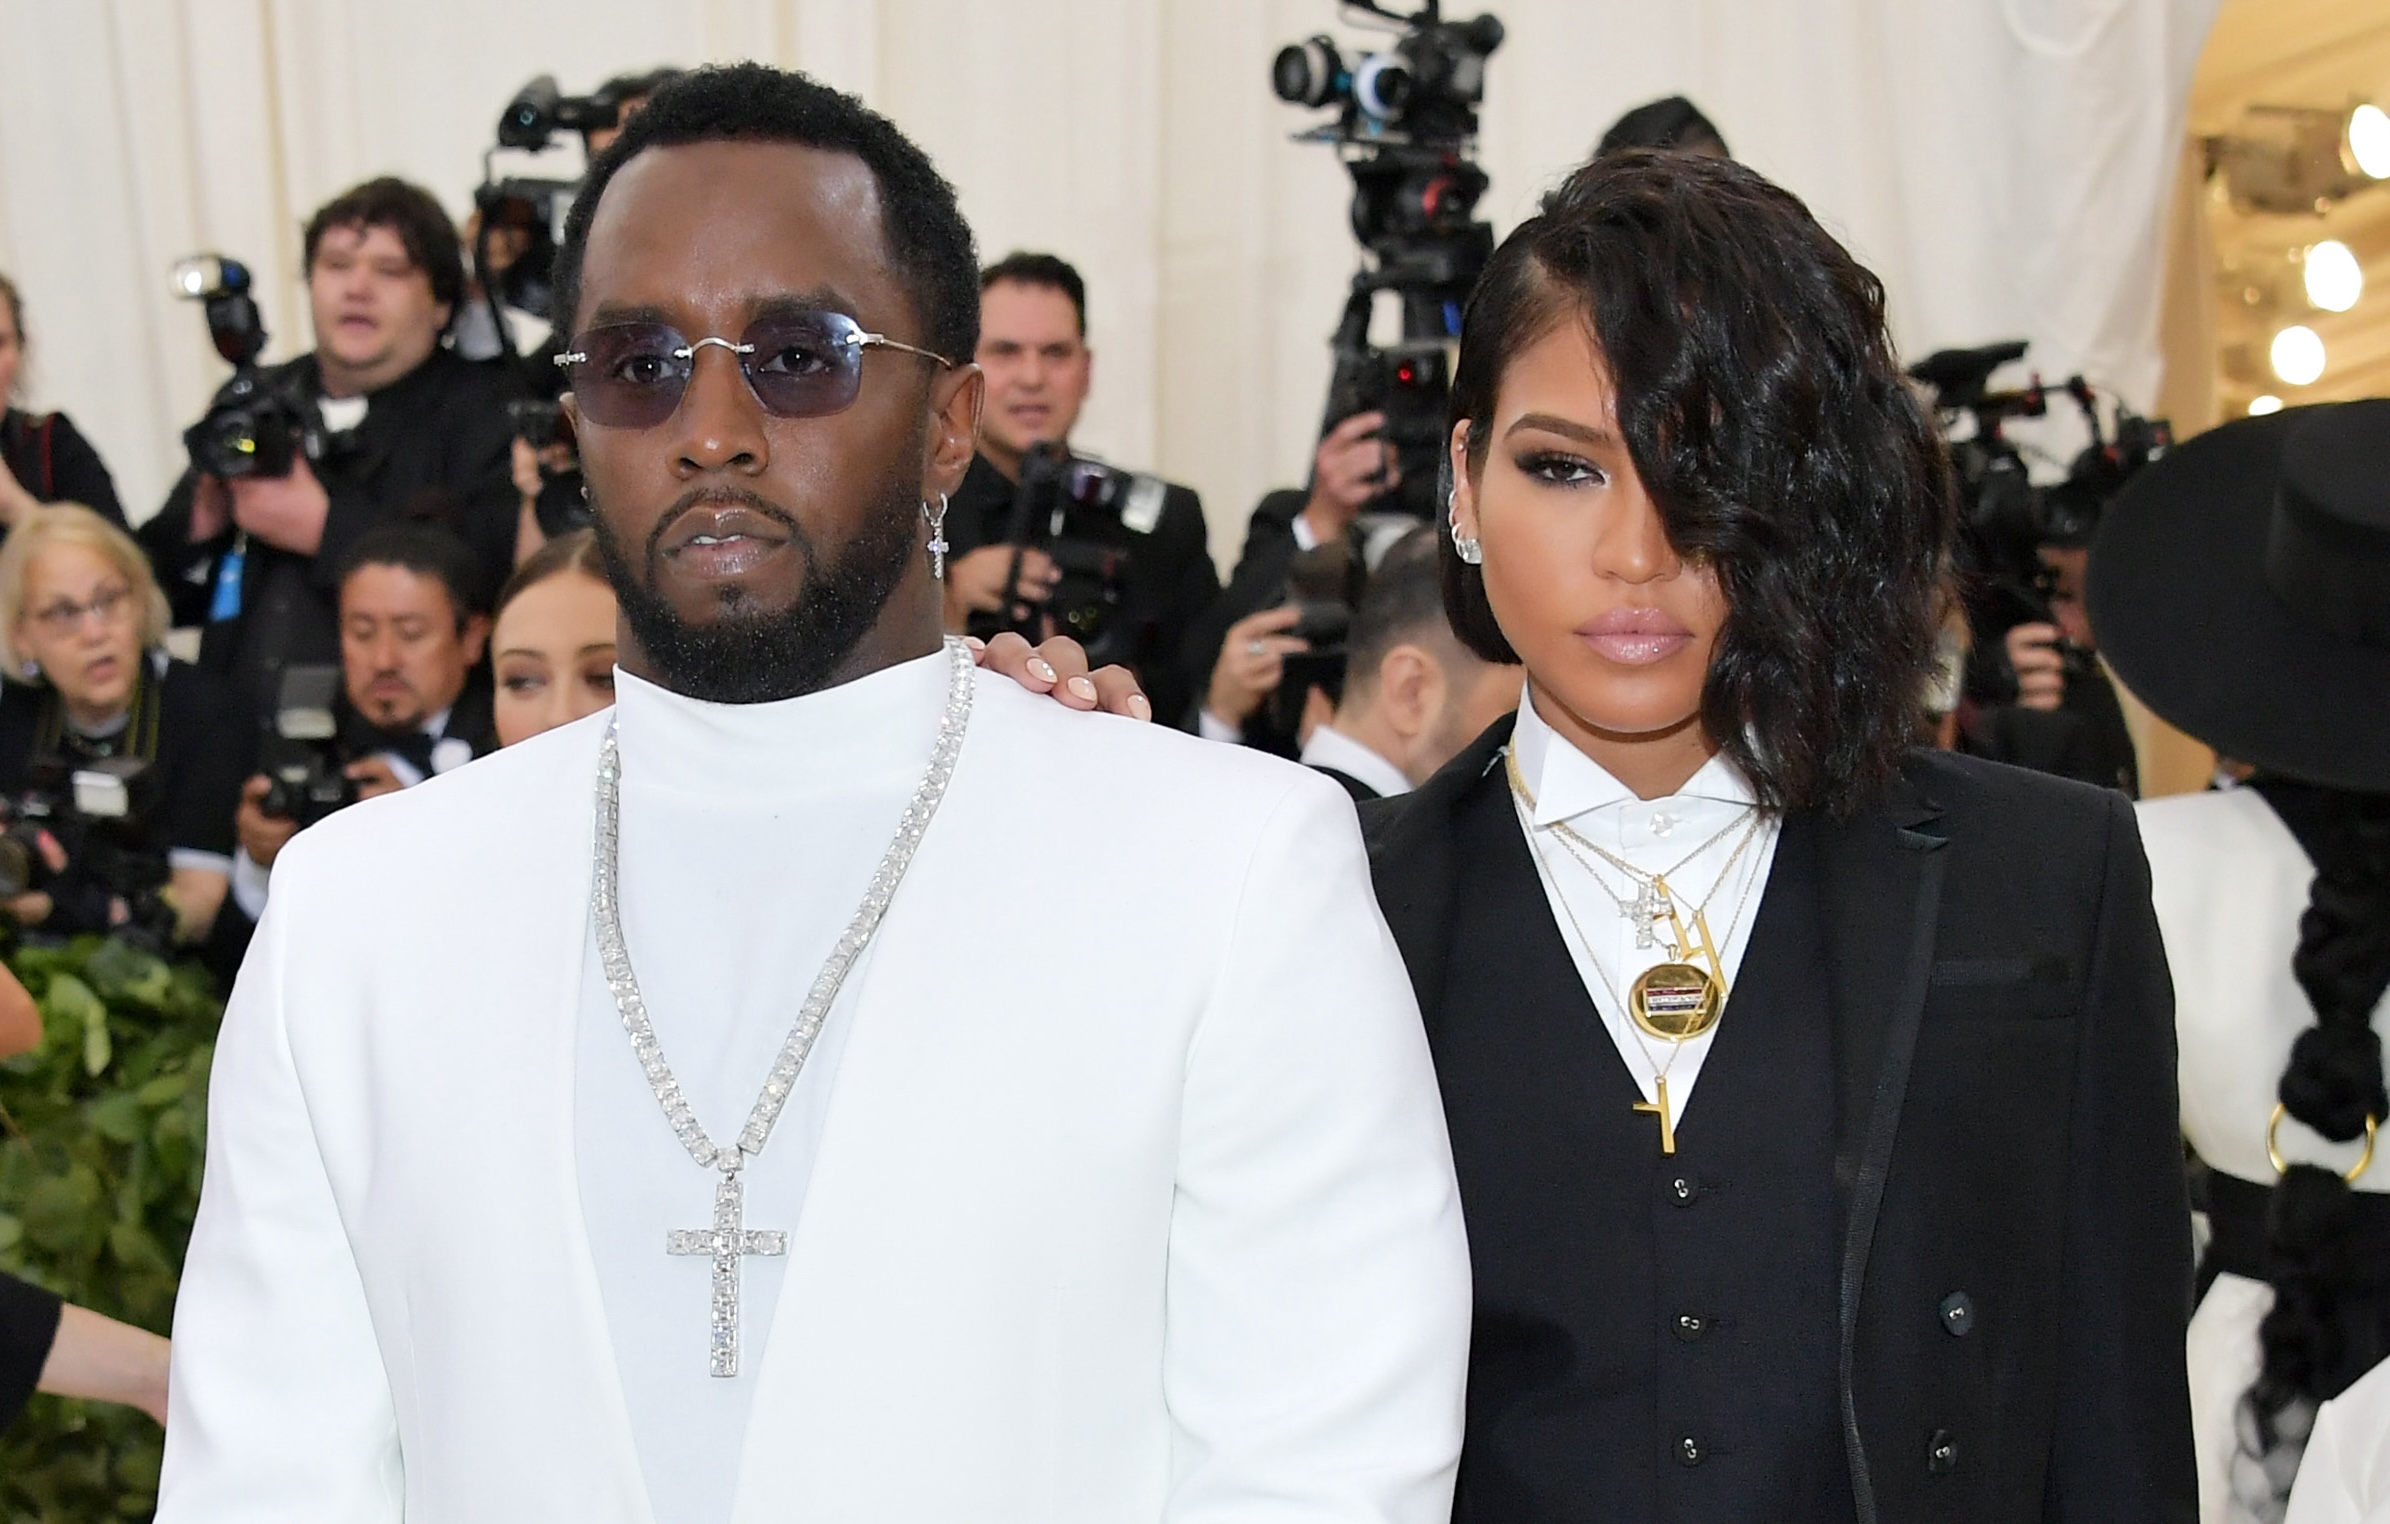 Social Media Reacts To Disturbing 2016 Surveillance Video Of Diddy Assaulting Cassie